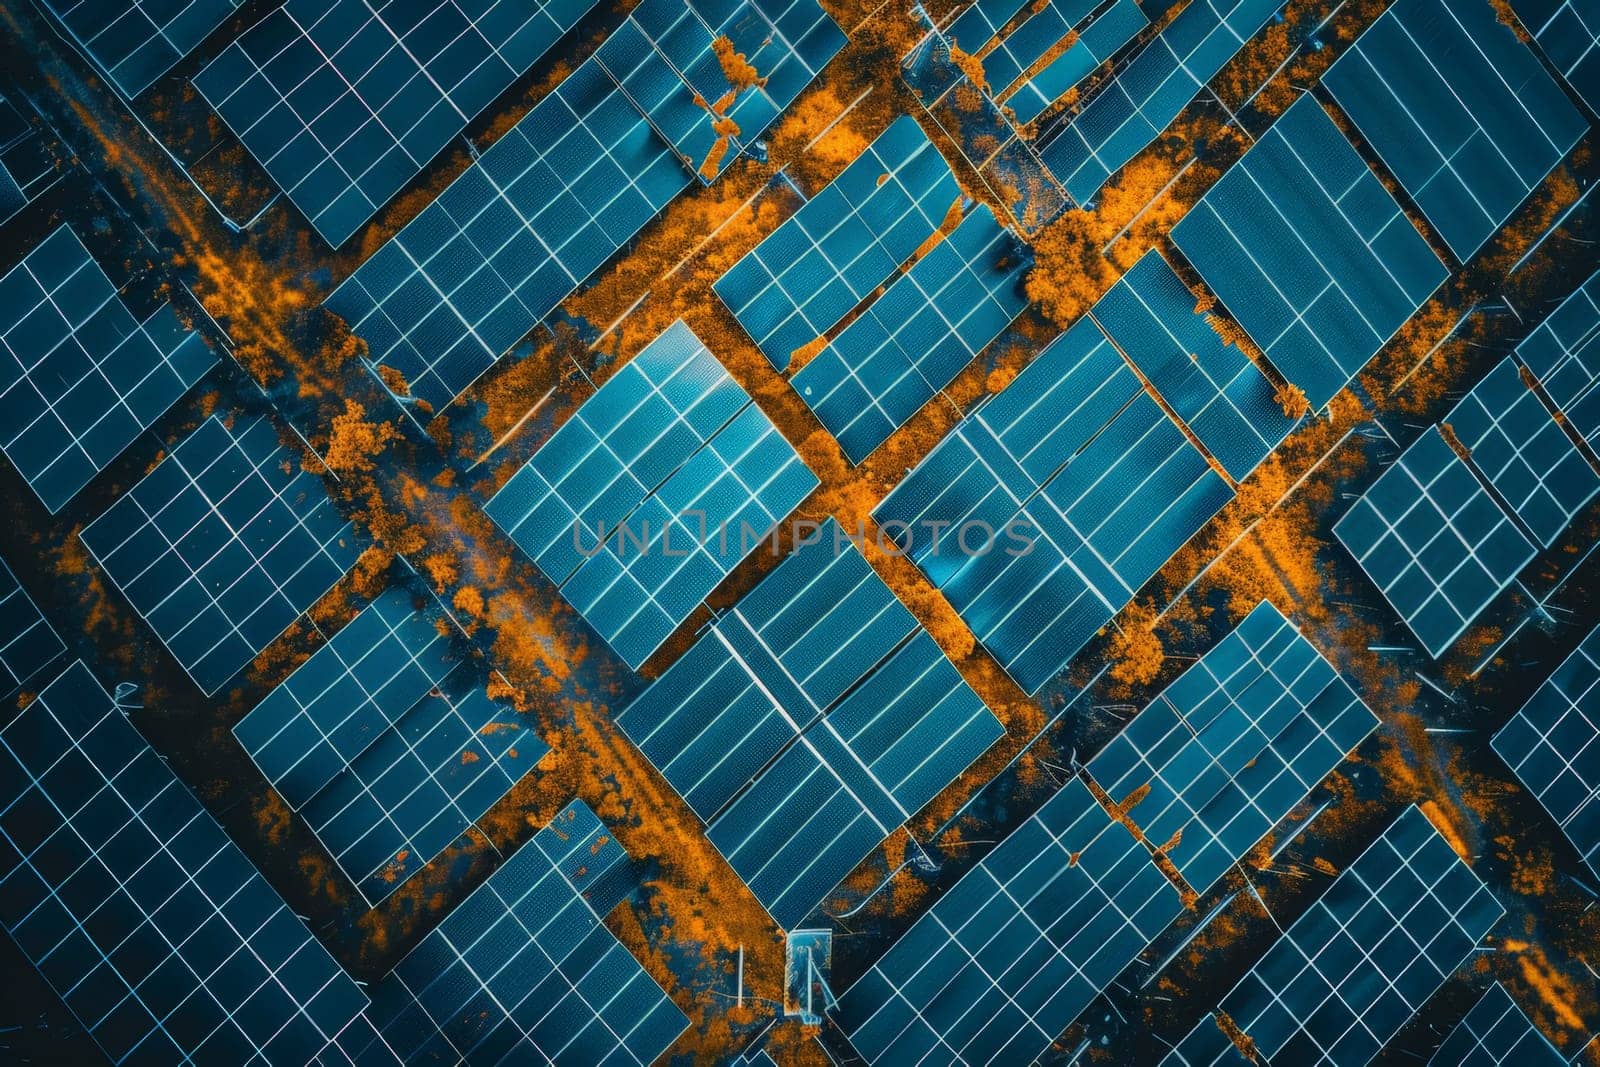 A blue and orange solar panel field. The blue panels are in the foreground and the orange panels are in the background